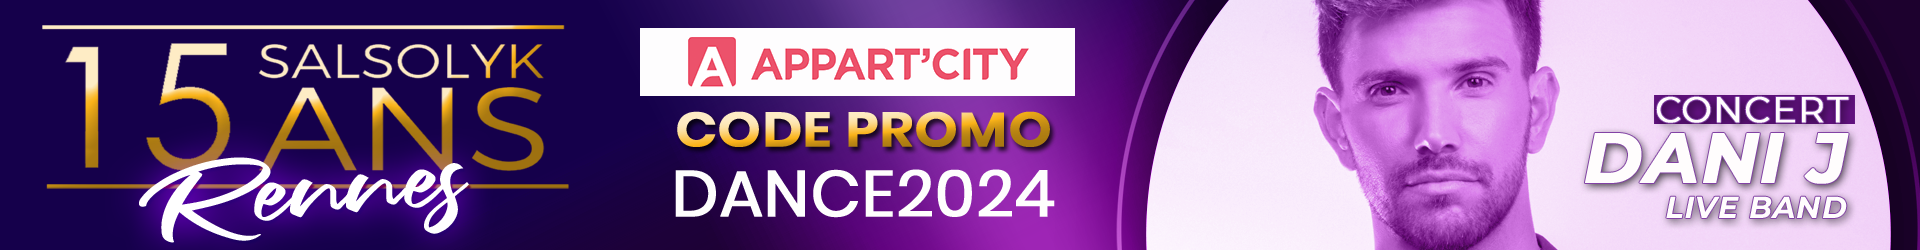 Code promo appart City rennes